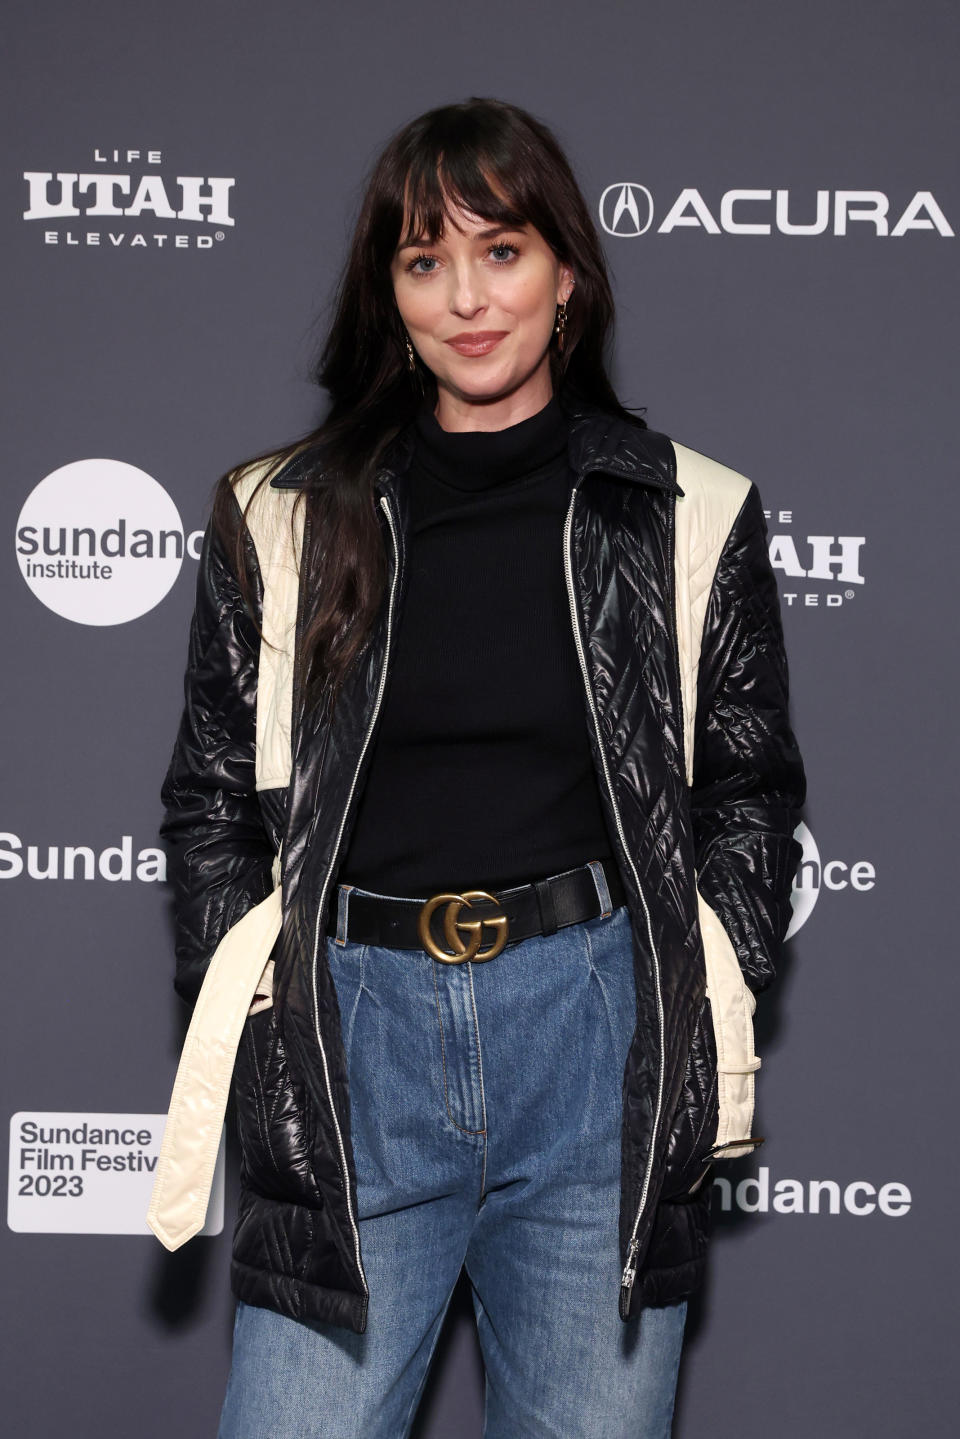 Close-up of Dakota at a media event in a jacket and jeans